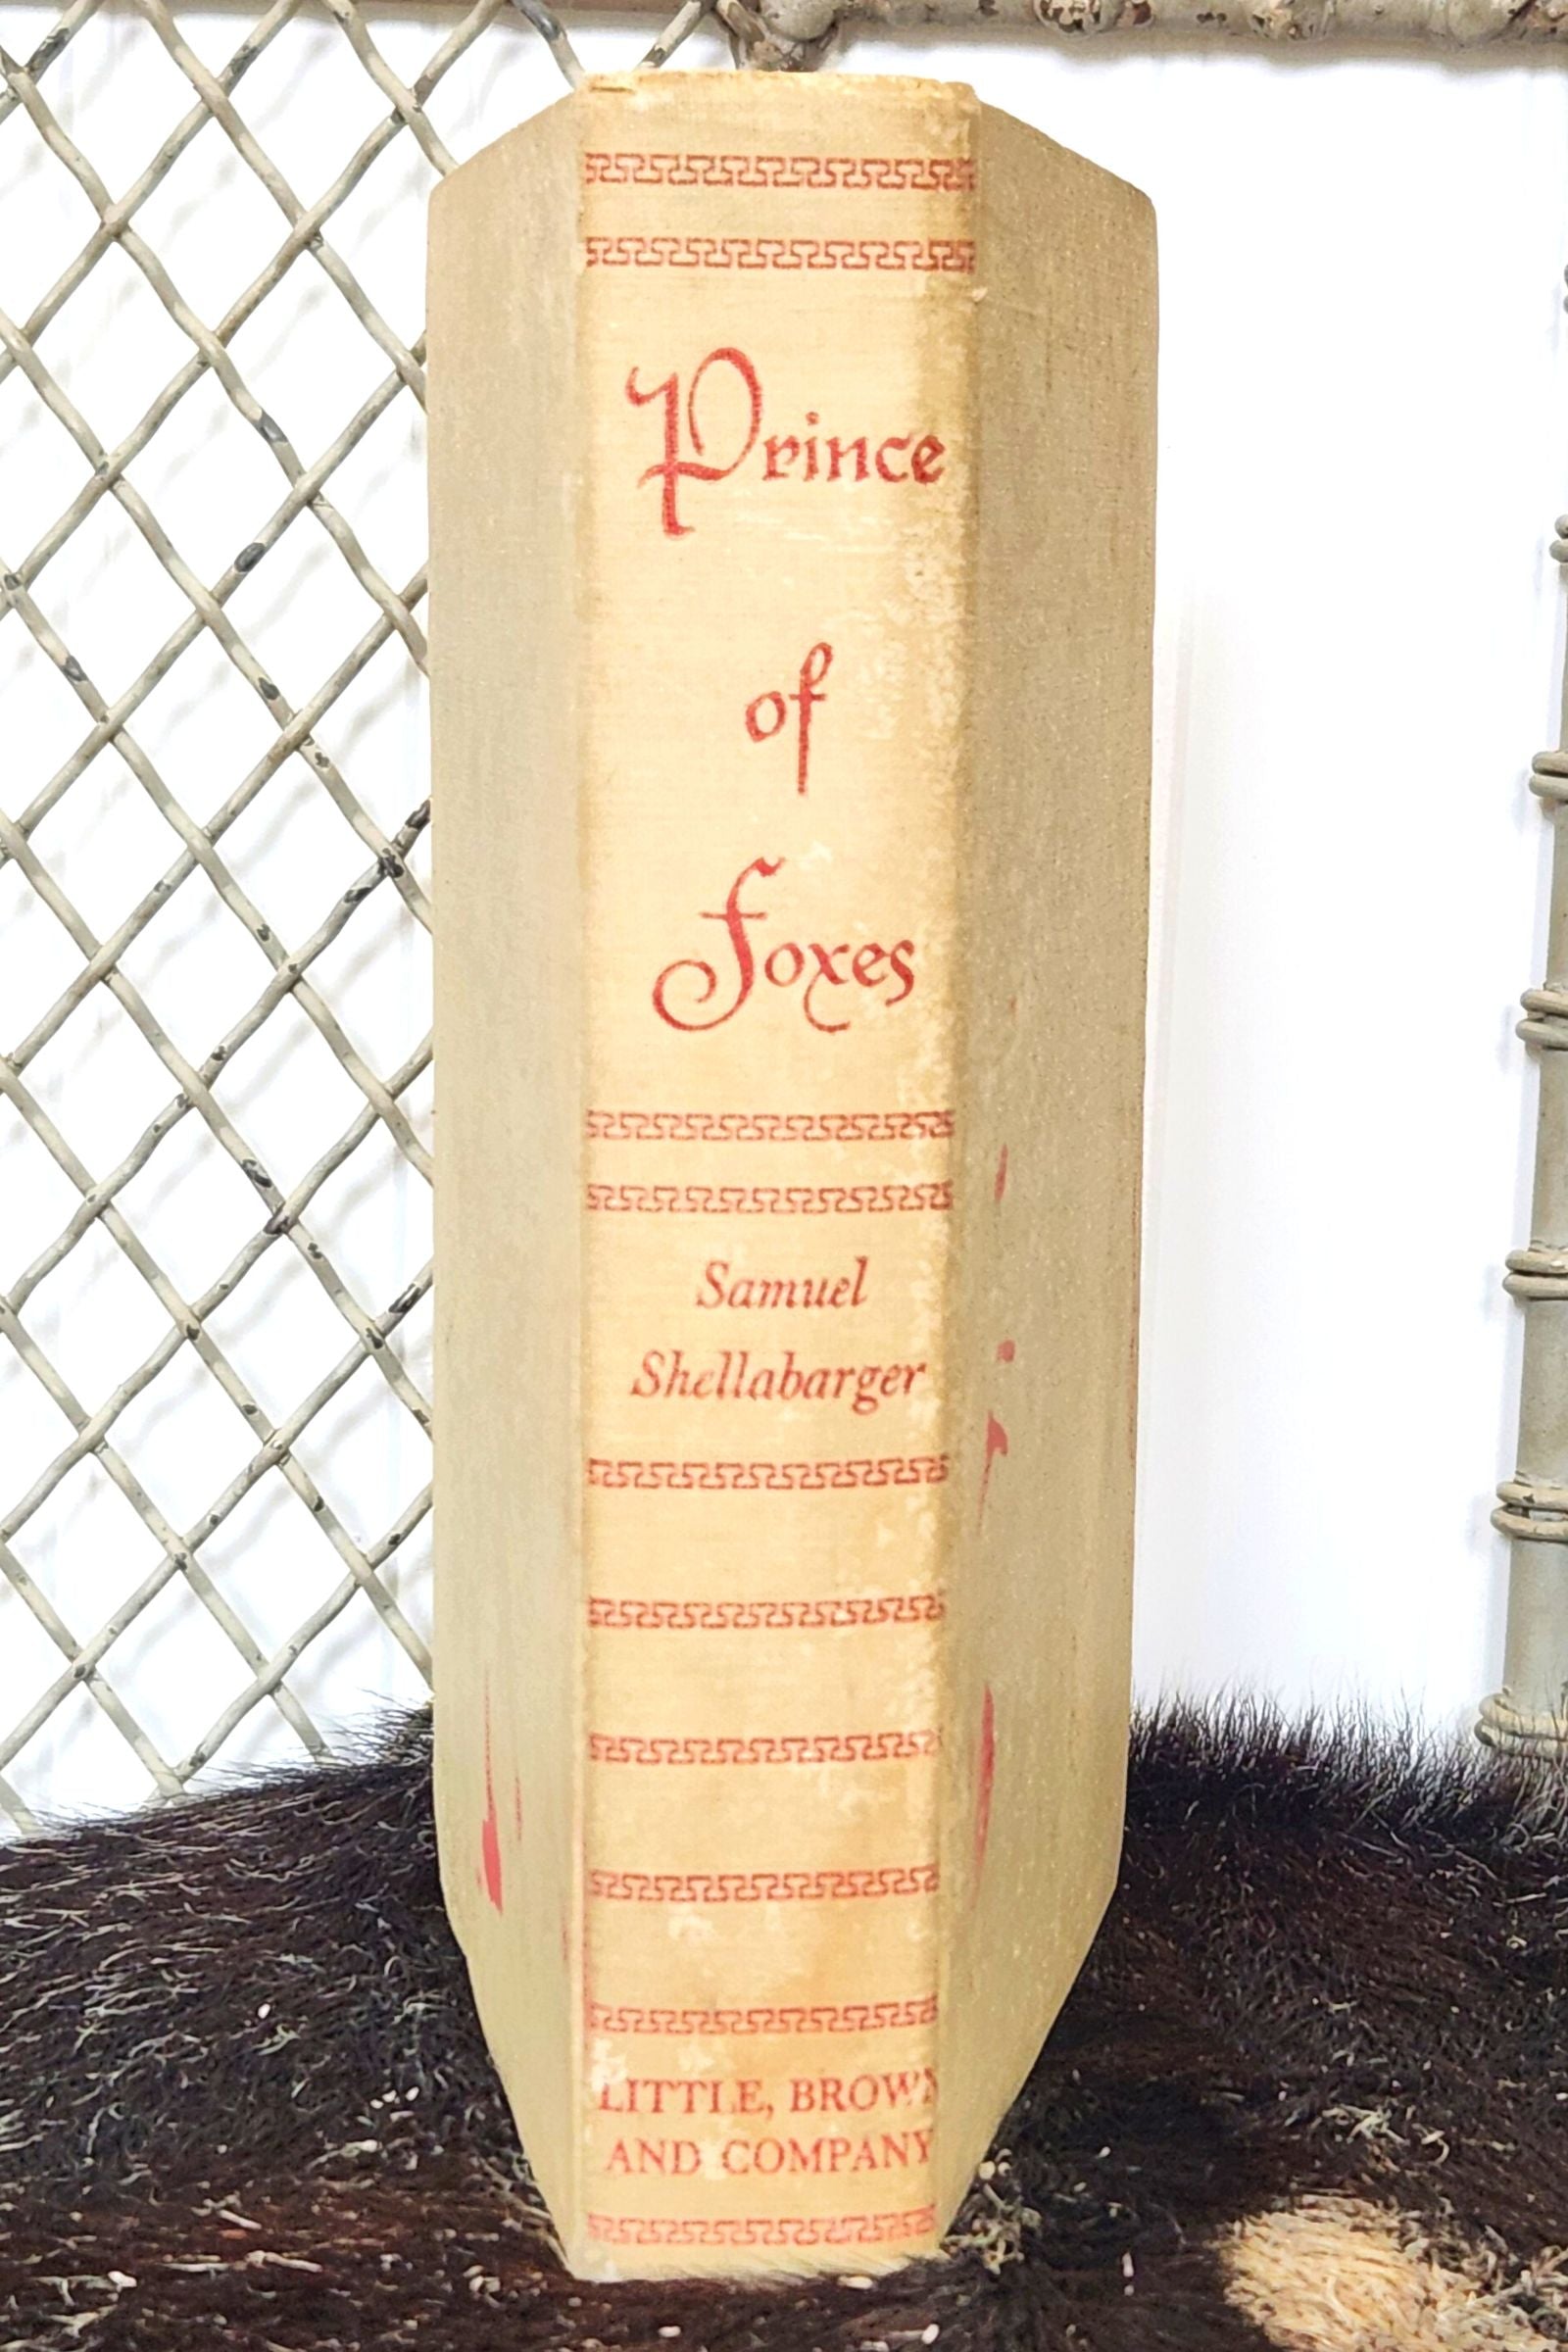 Prince of Foxes by Samuel Shellabarger - Vintage Book